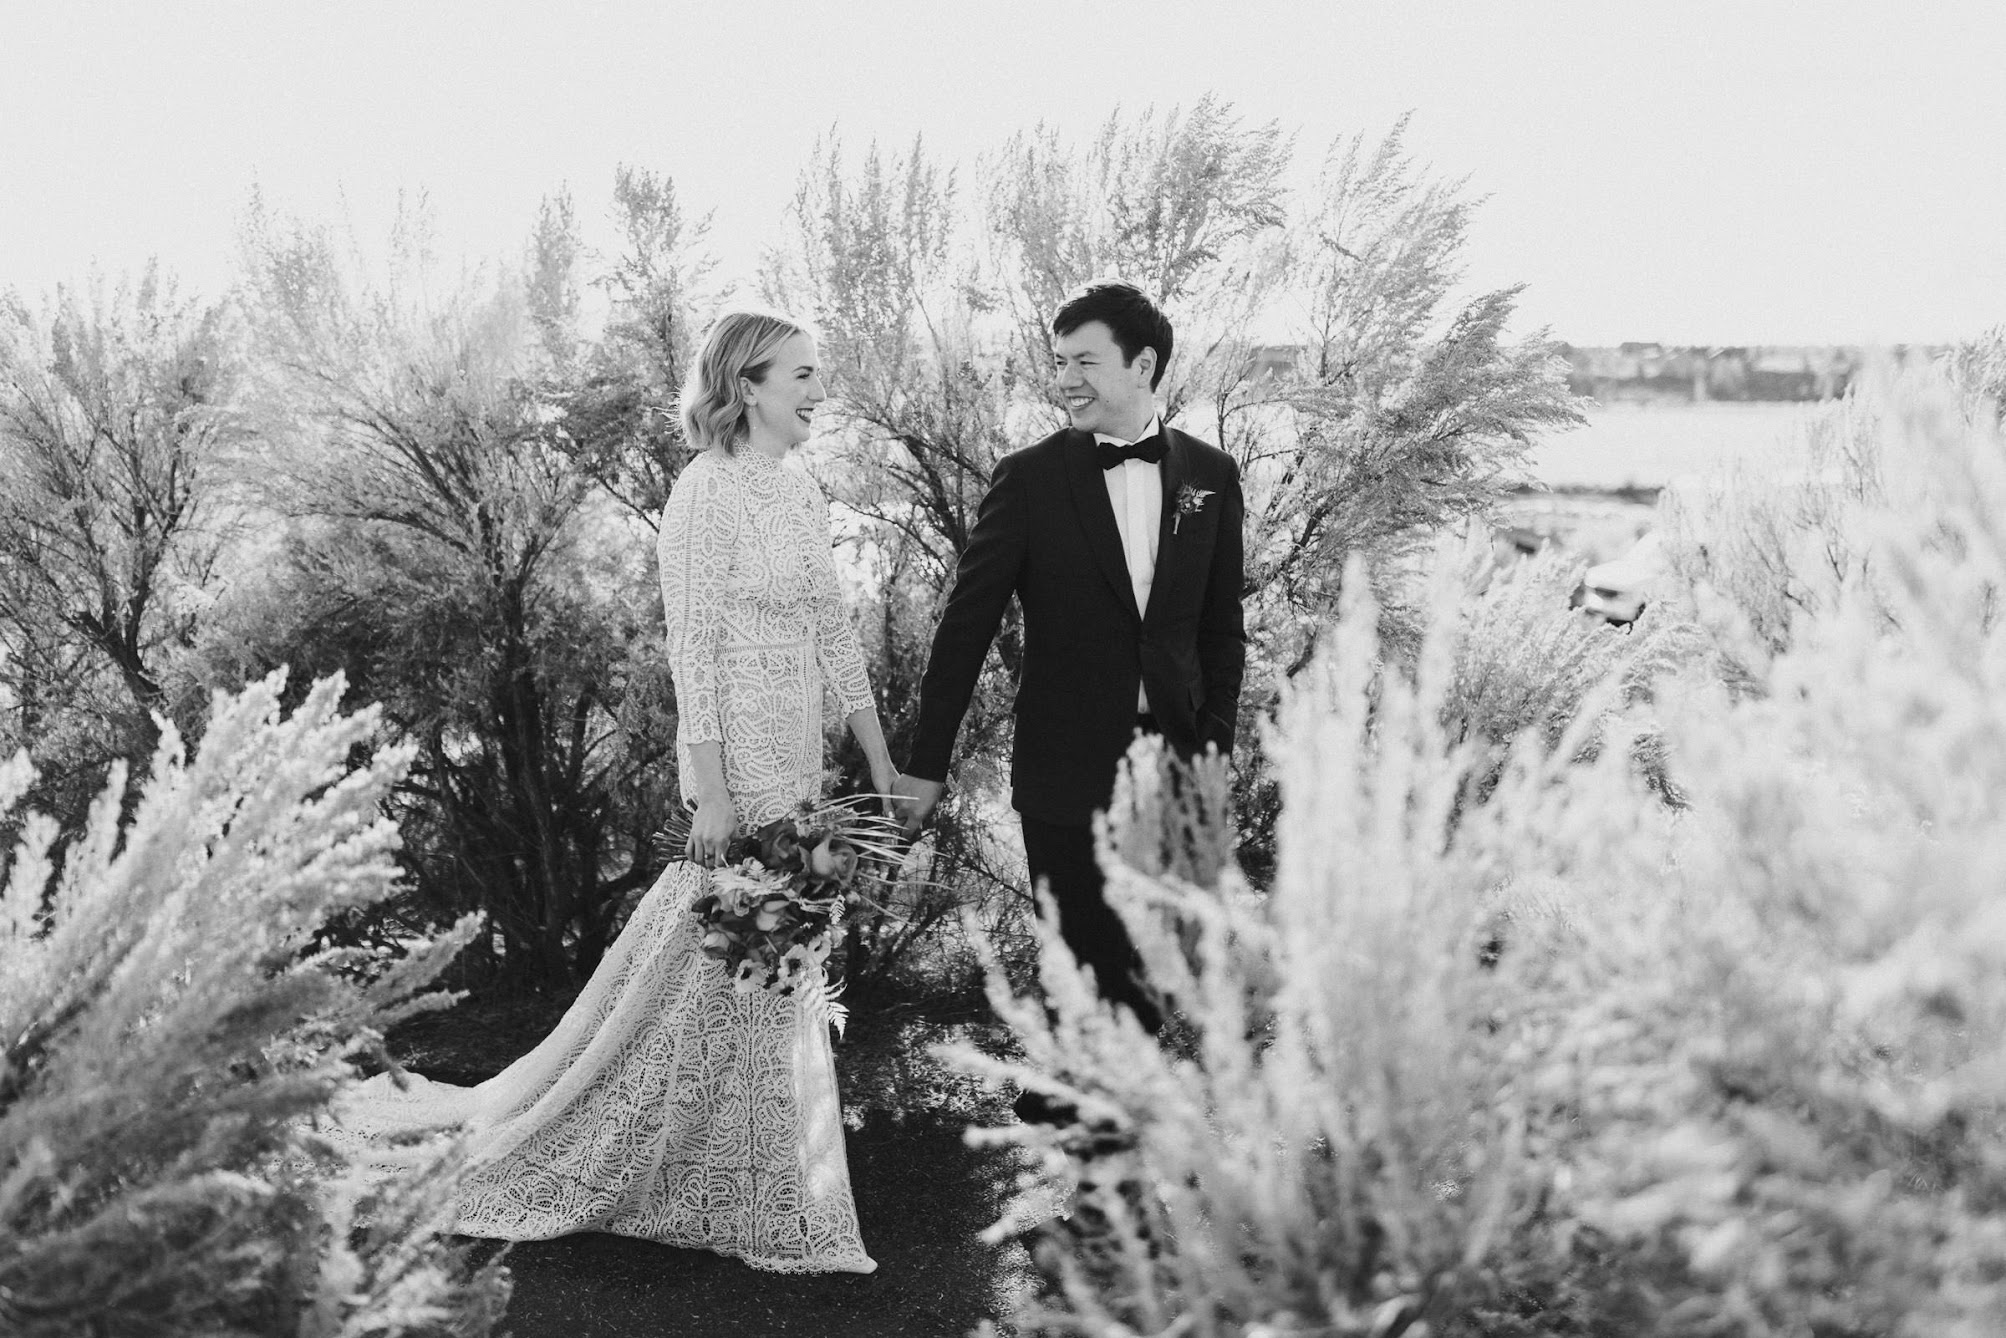 Bride and groom walking through dried bushes while holding hands looking at each other.